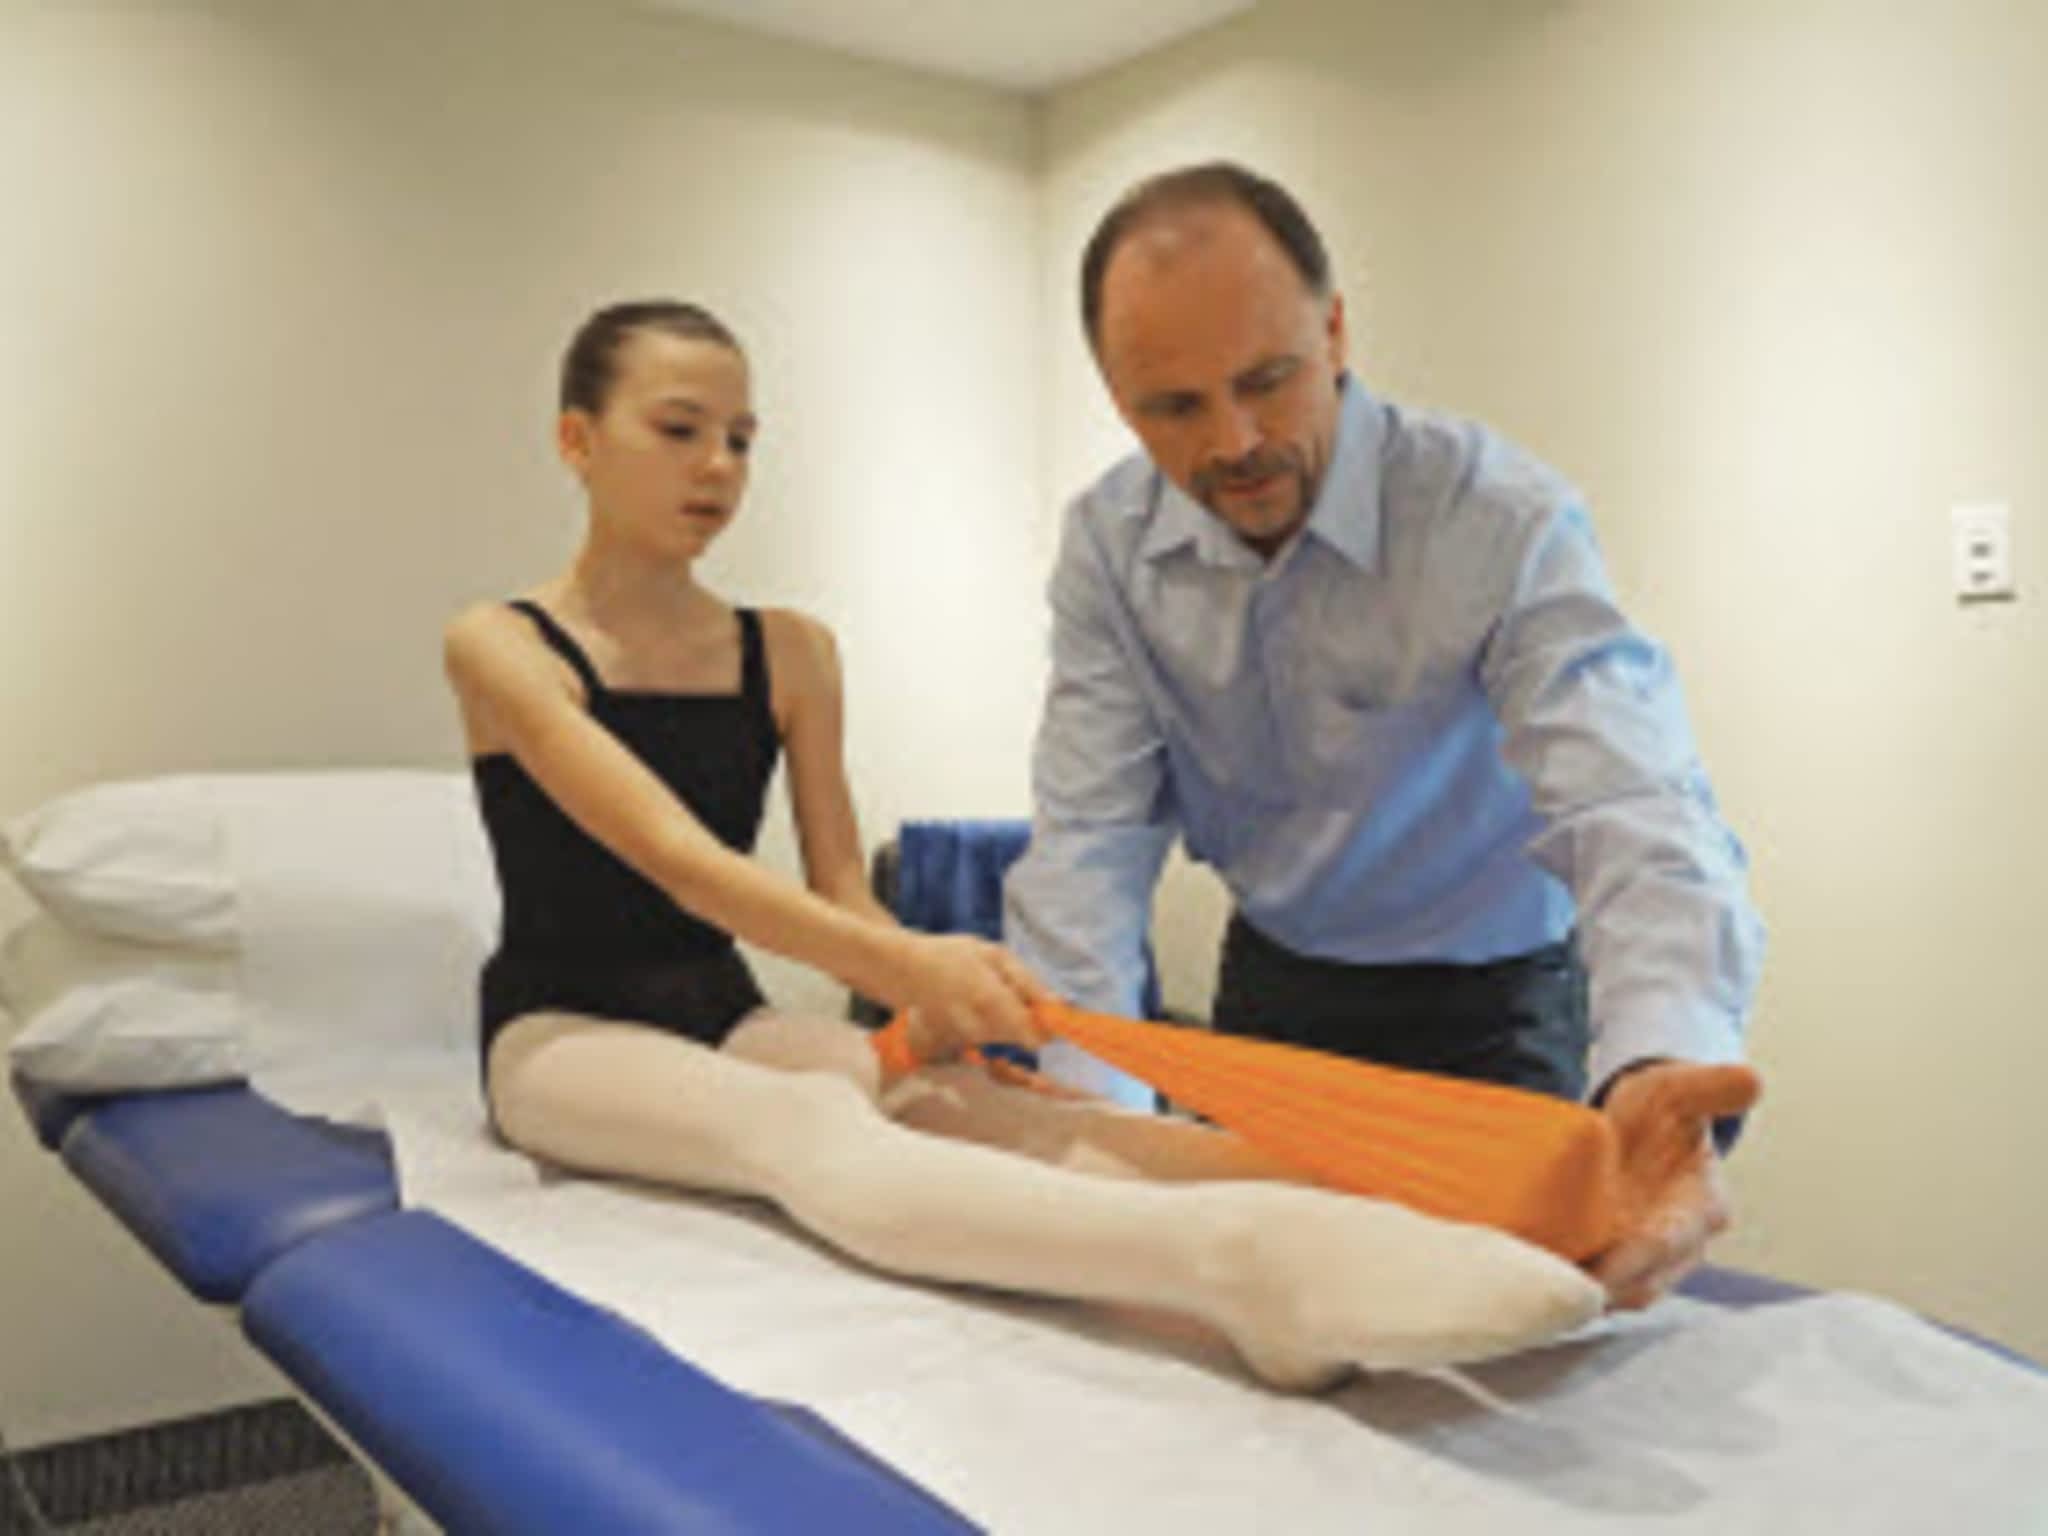 photo Dorval Physiotherapy